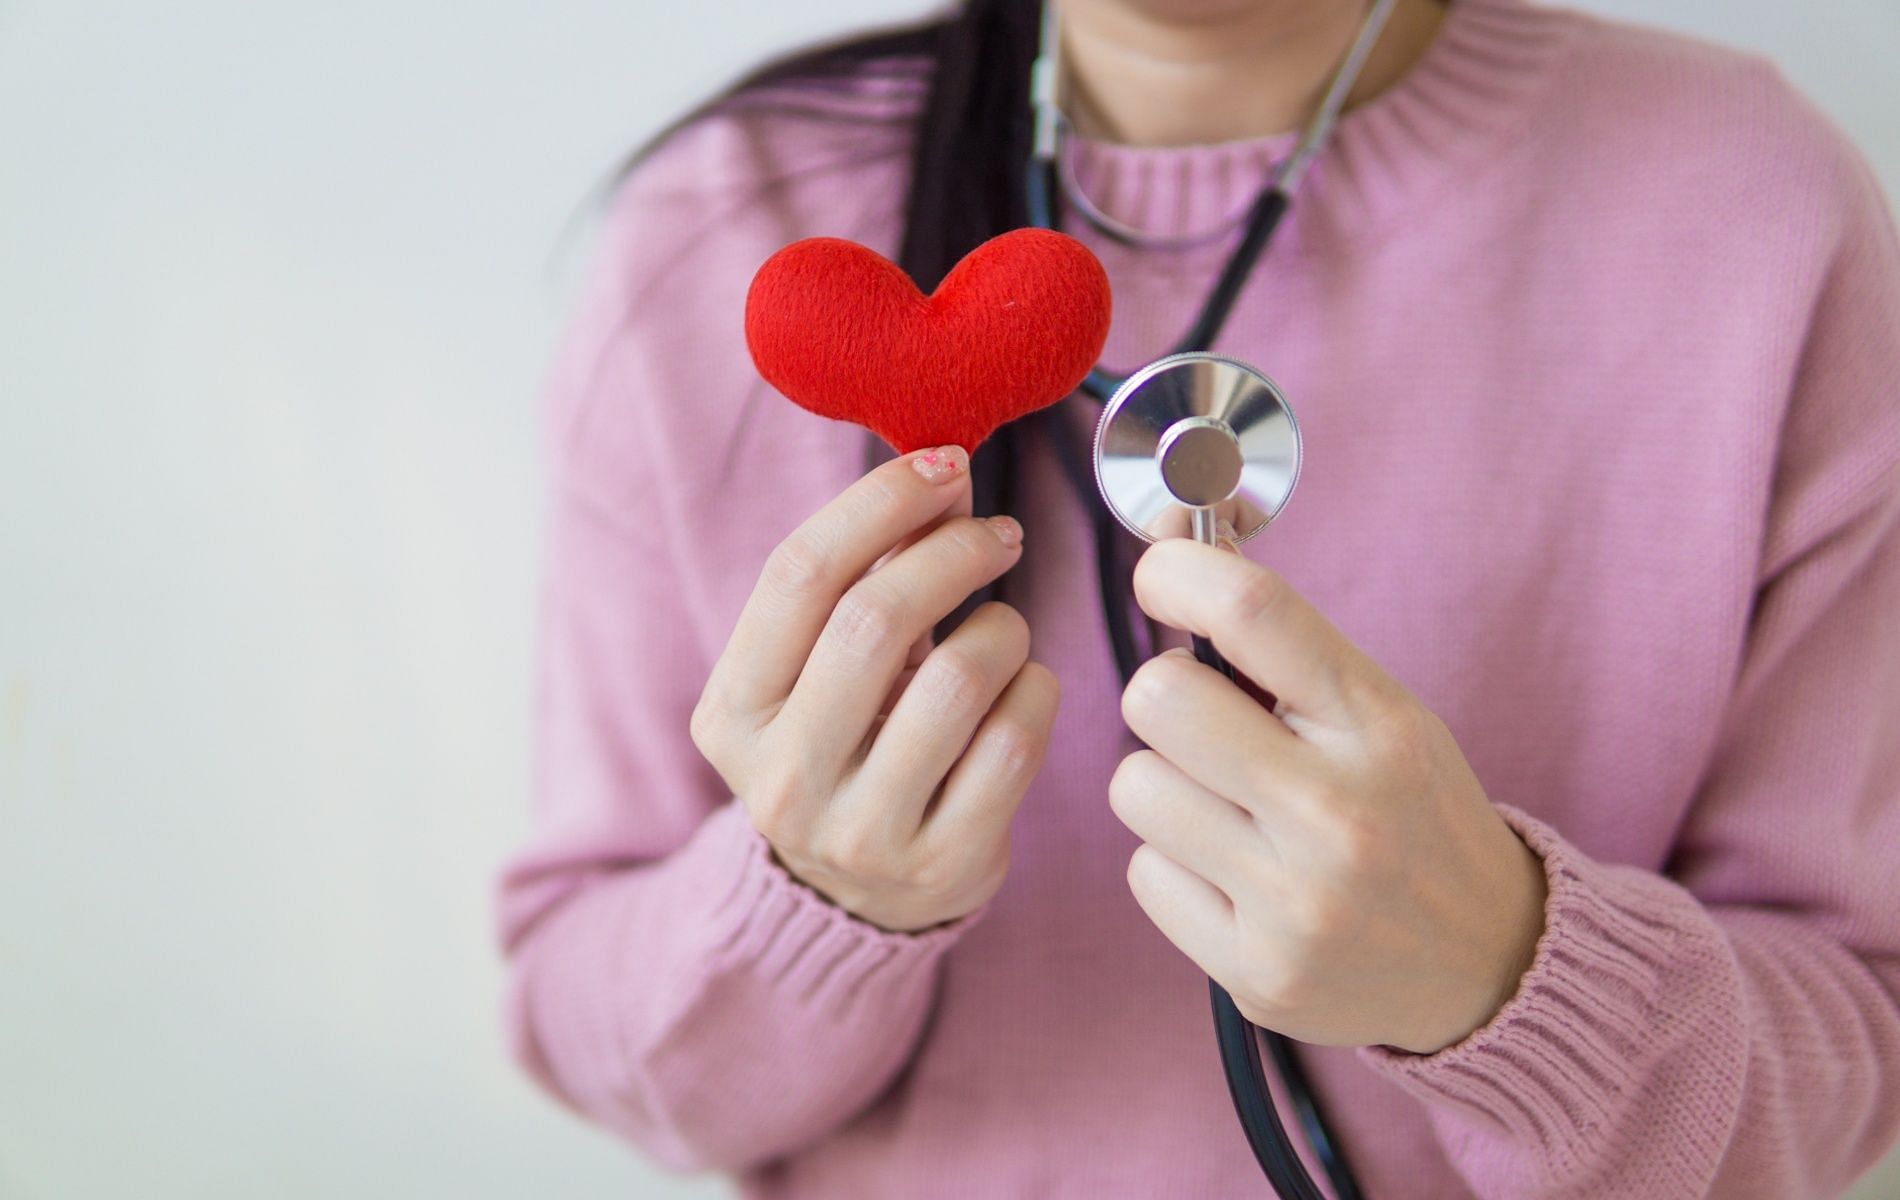 Keeping the heart safe is one of the major benefits of taurine. (Image by Puwadon Sangngern via Pexels)